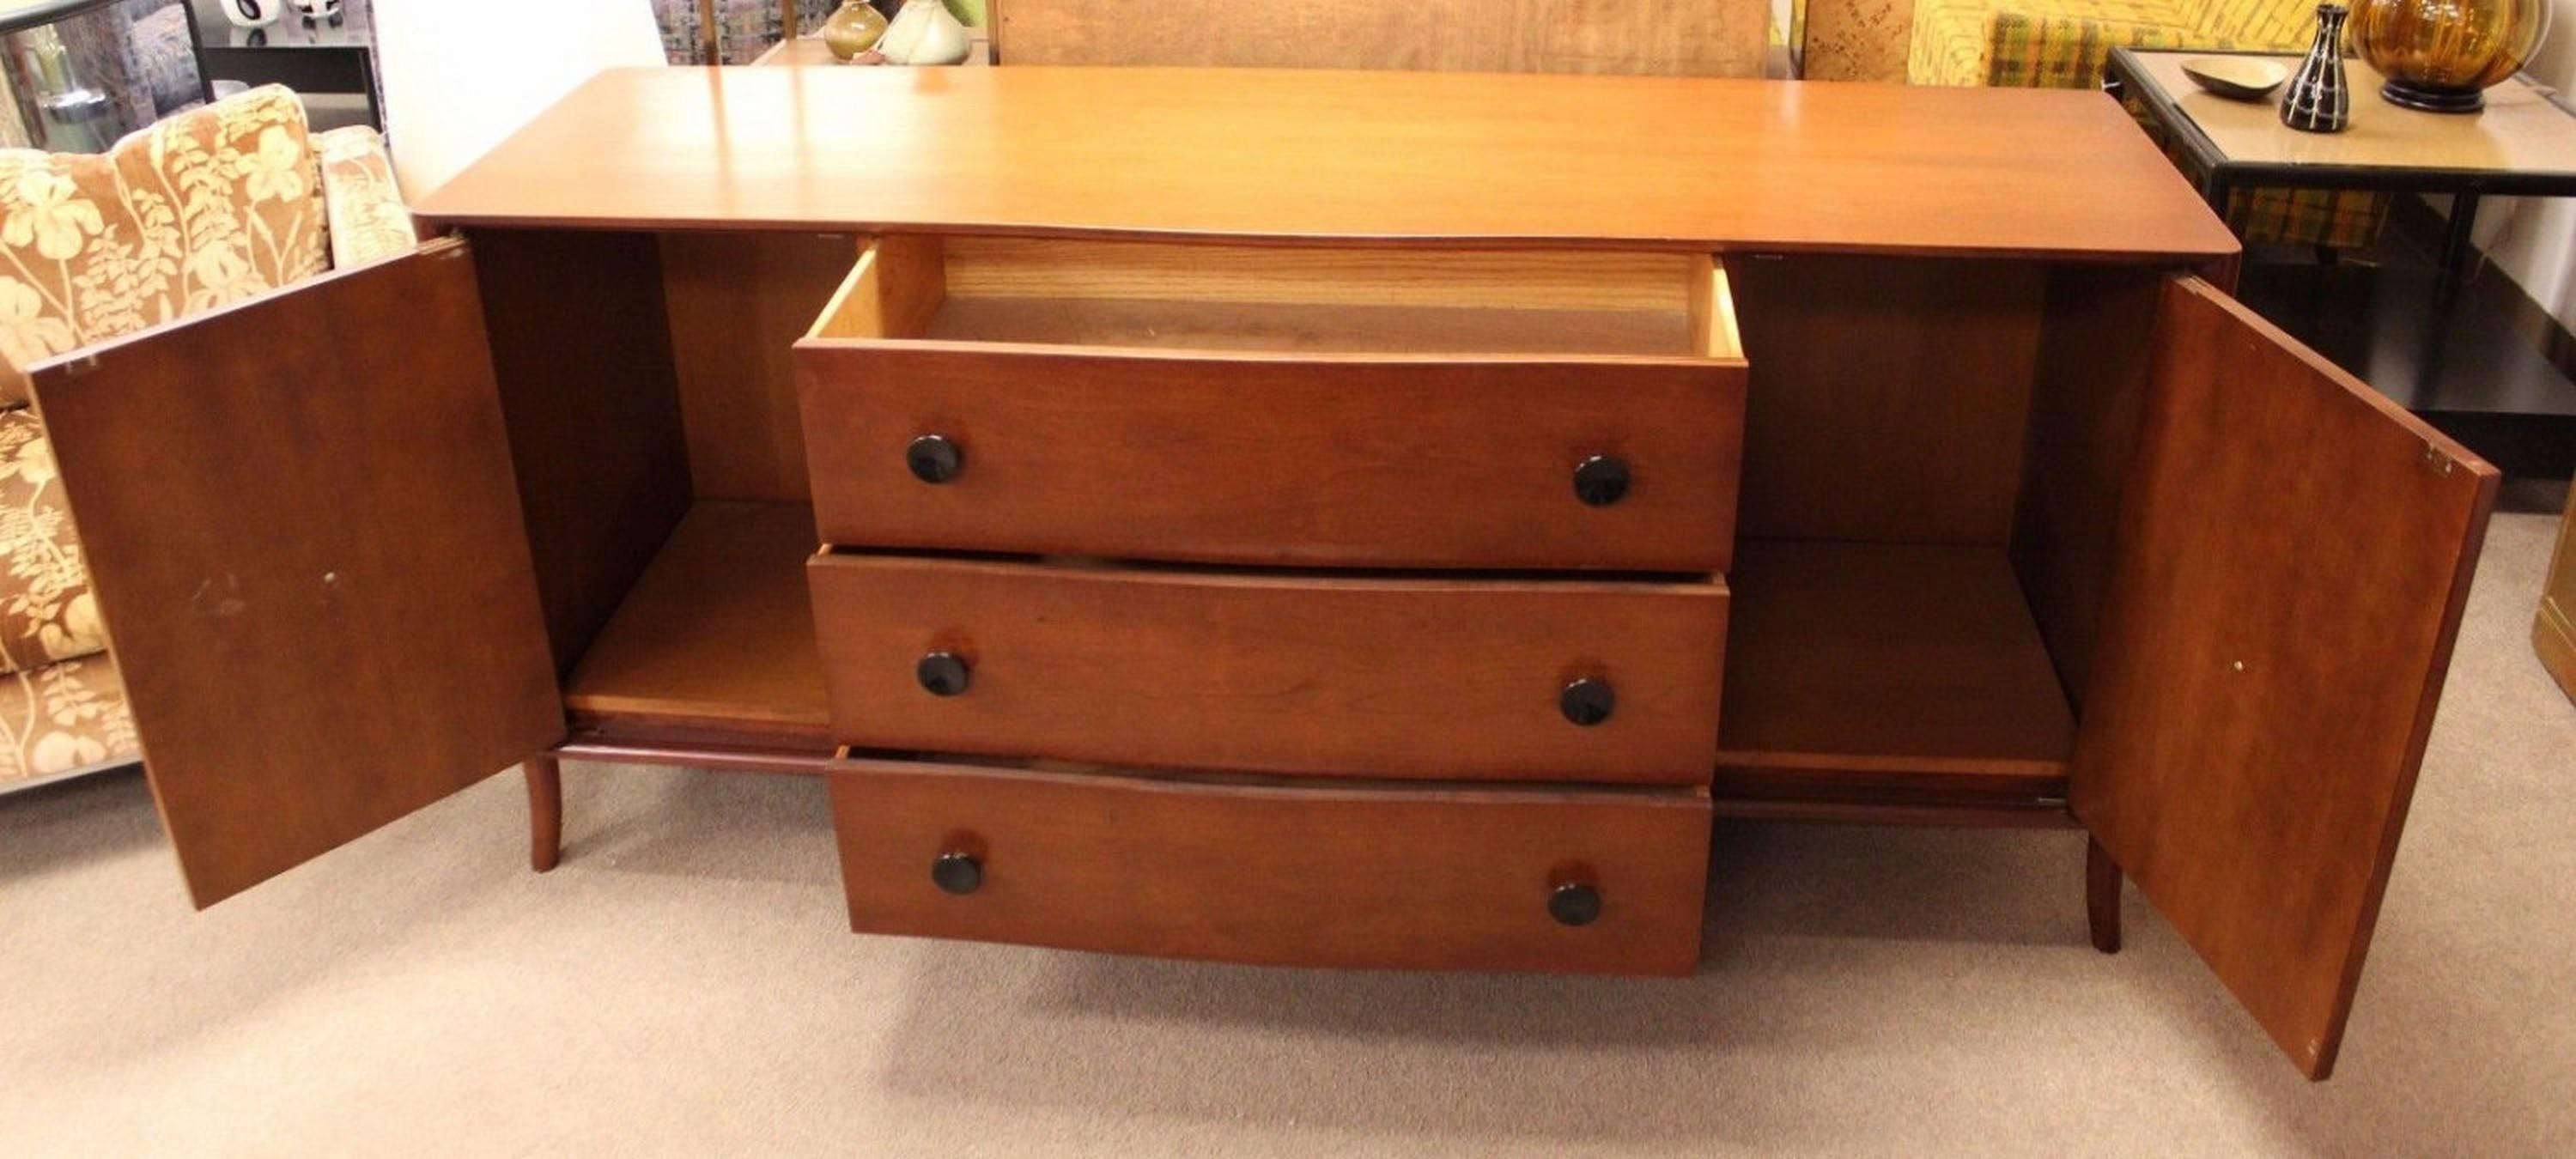 For your consideration is a wonderfully curved credenza by Robsjohn-Gibbings for Widdicomb. In excellent condition. With original tags. The dimensions are 70